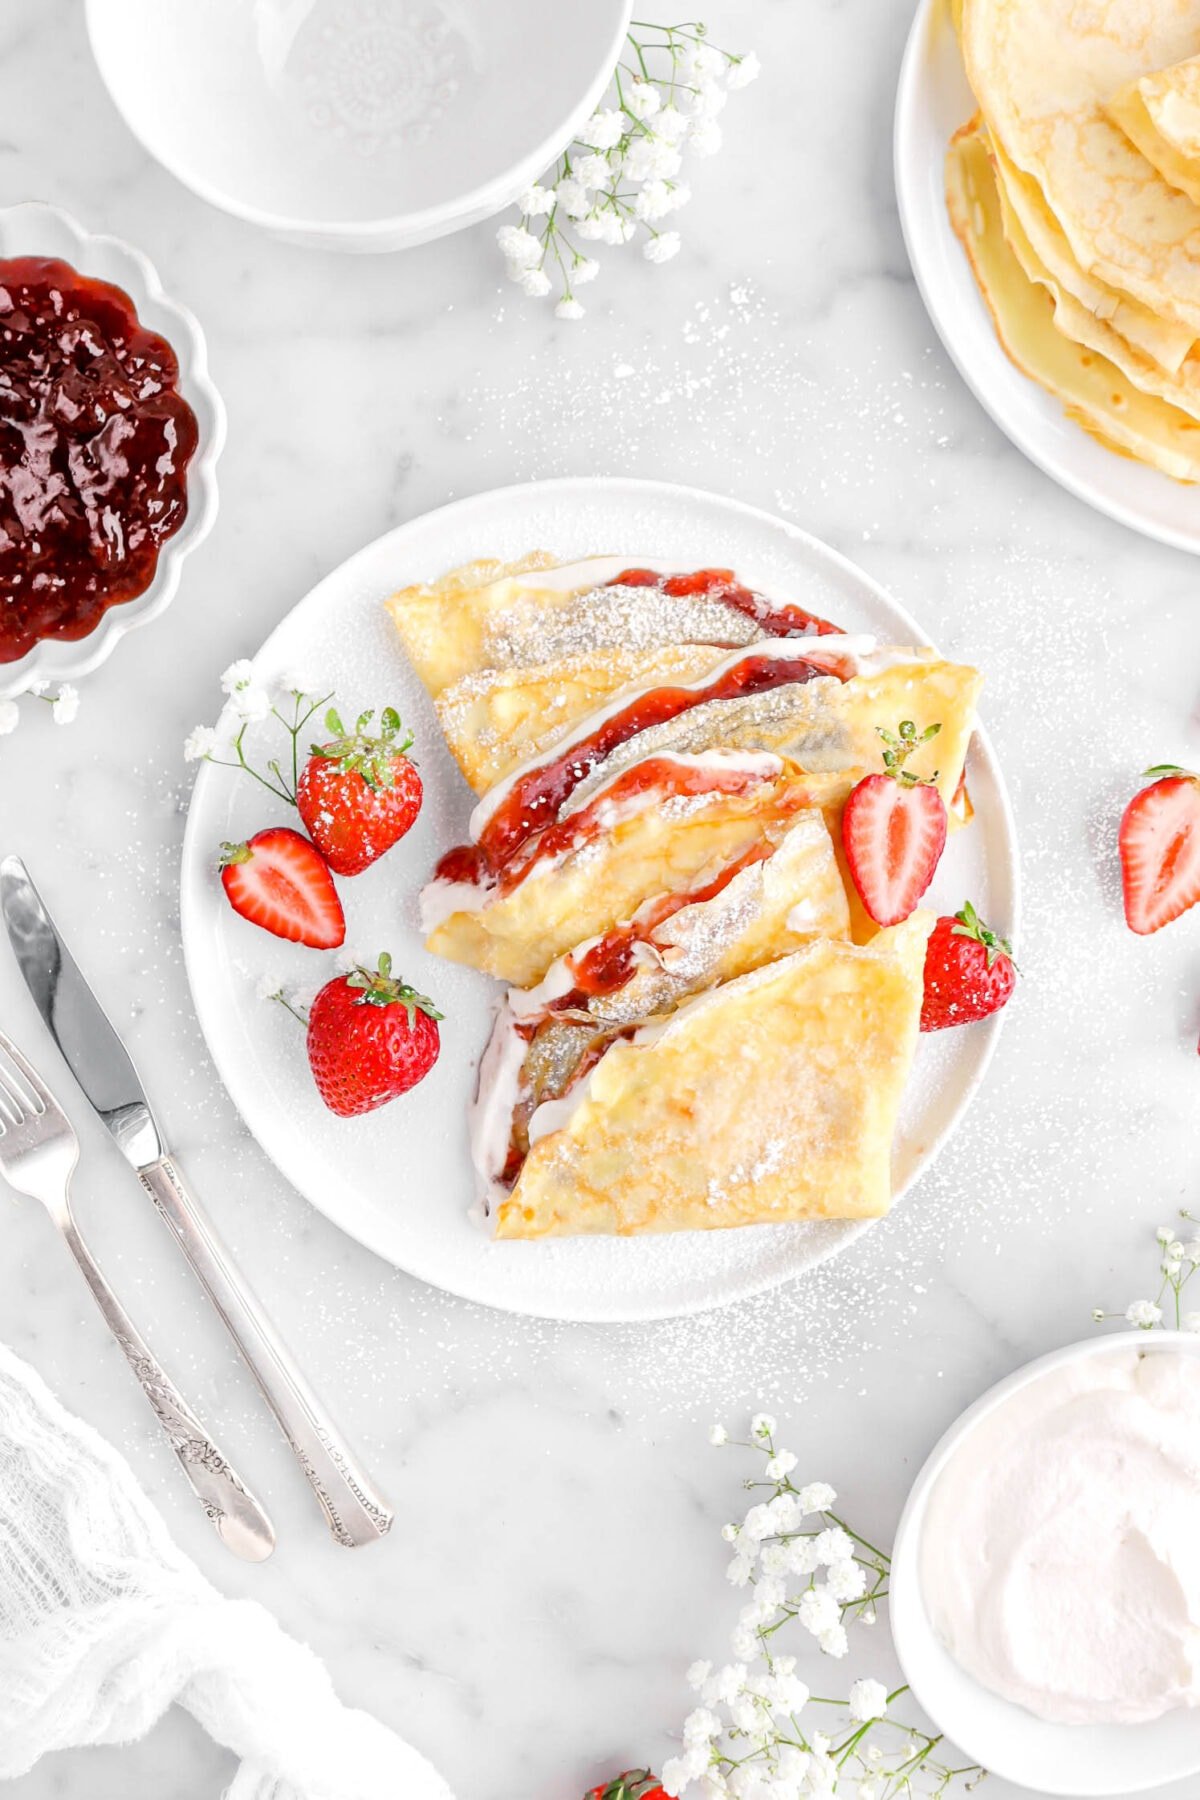 strawberries and cream crepes on white plate with fresh strawberries and white flowers beside, a bowl of jam, unfilled crepes, and bowl of whipped cream around.